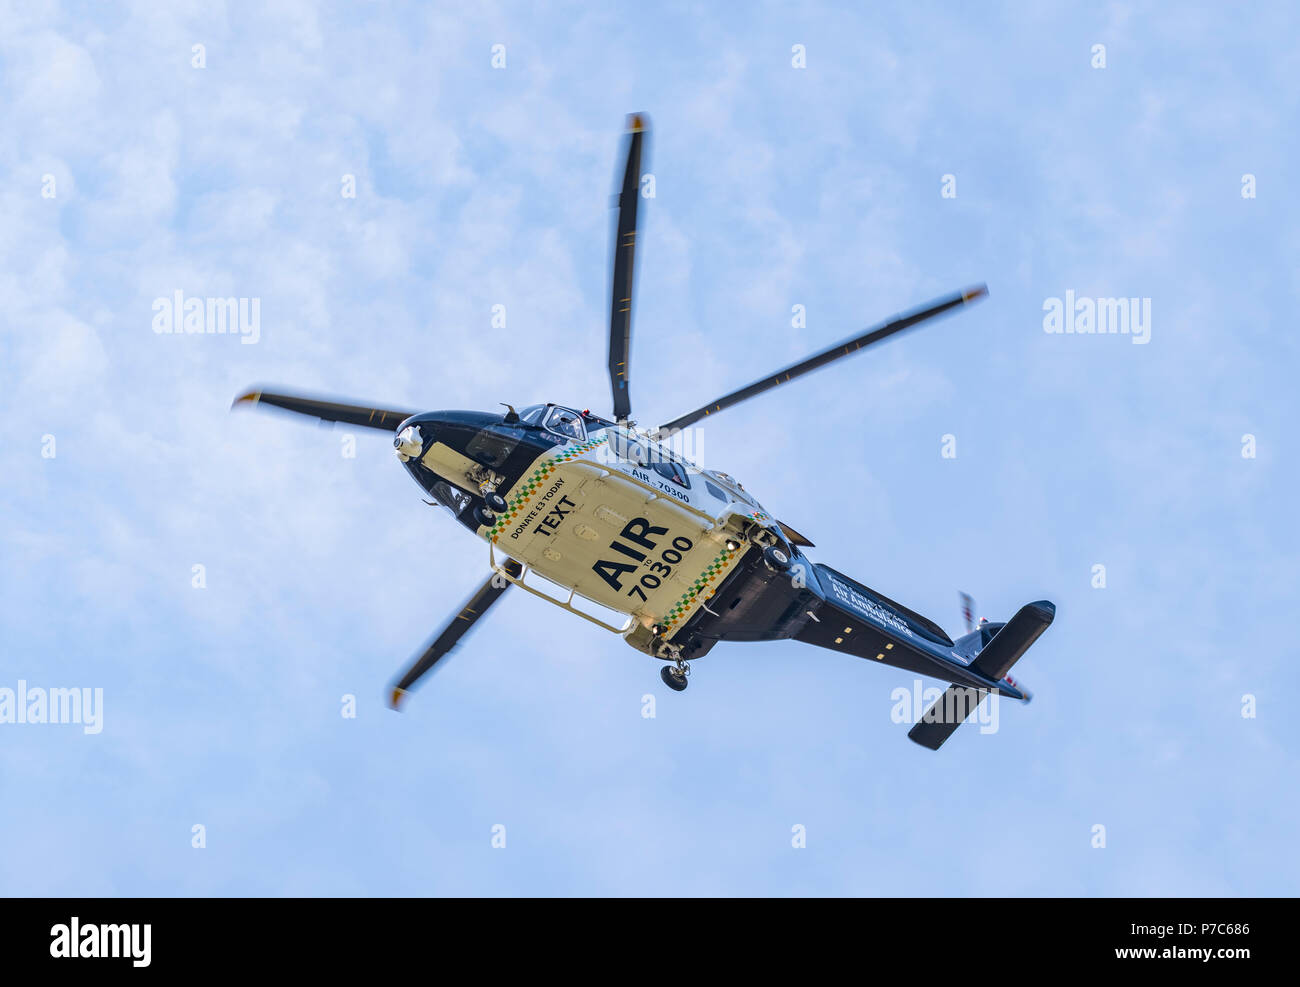 Underside of low flying Kent, Surrey & Sussex air ambulance helicopter (G-KSST) in West Sussex, England, UK. Aircraft is AgustaWestland AW169. Stock Photo